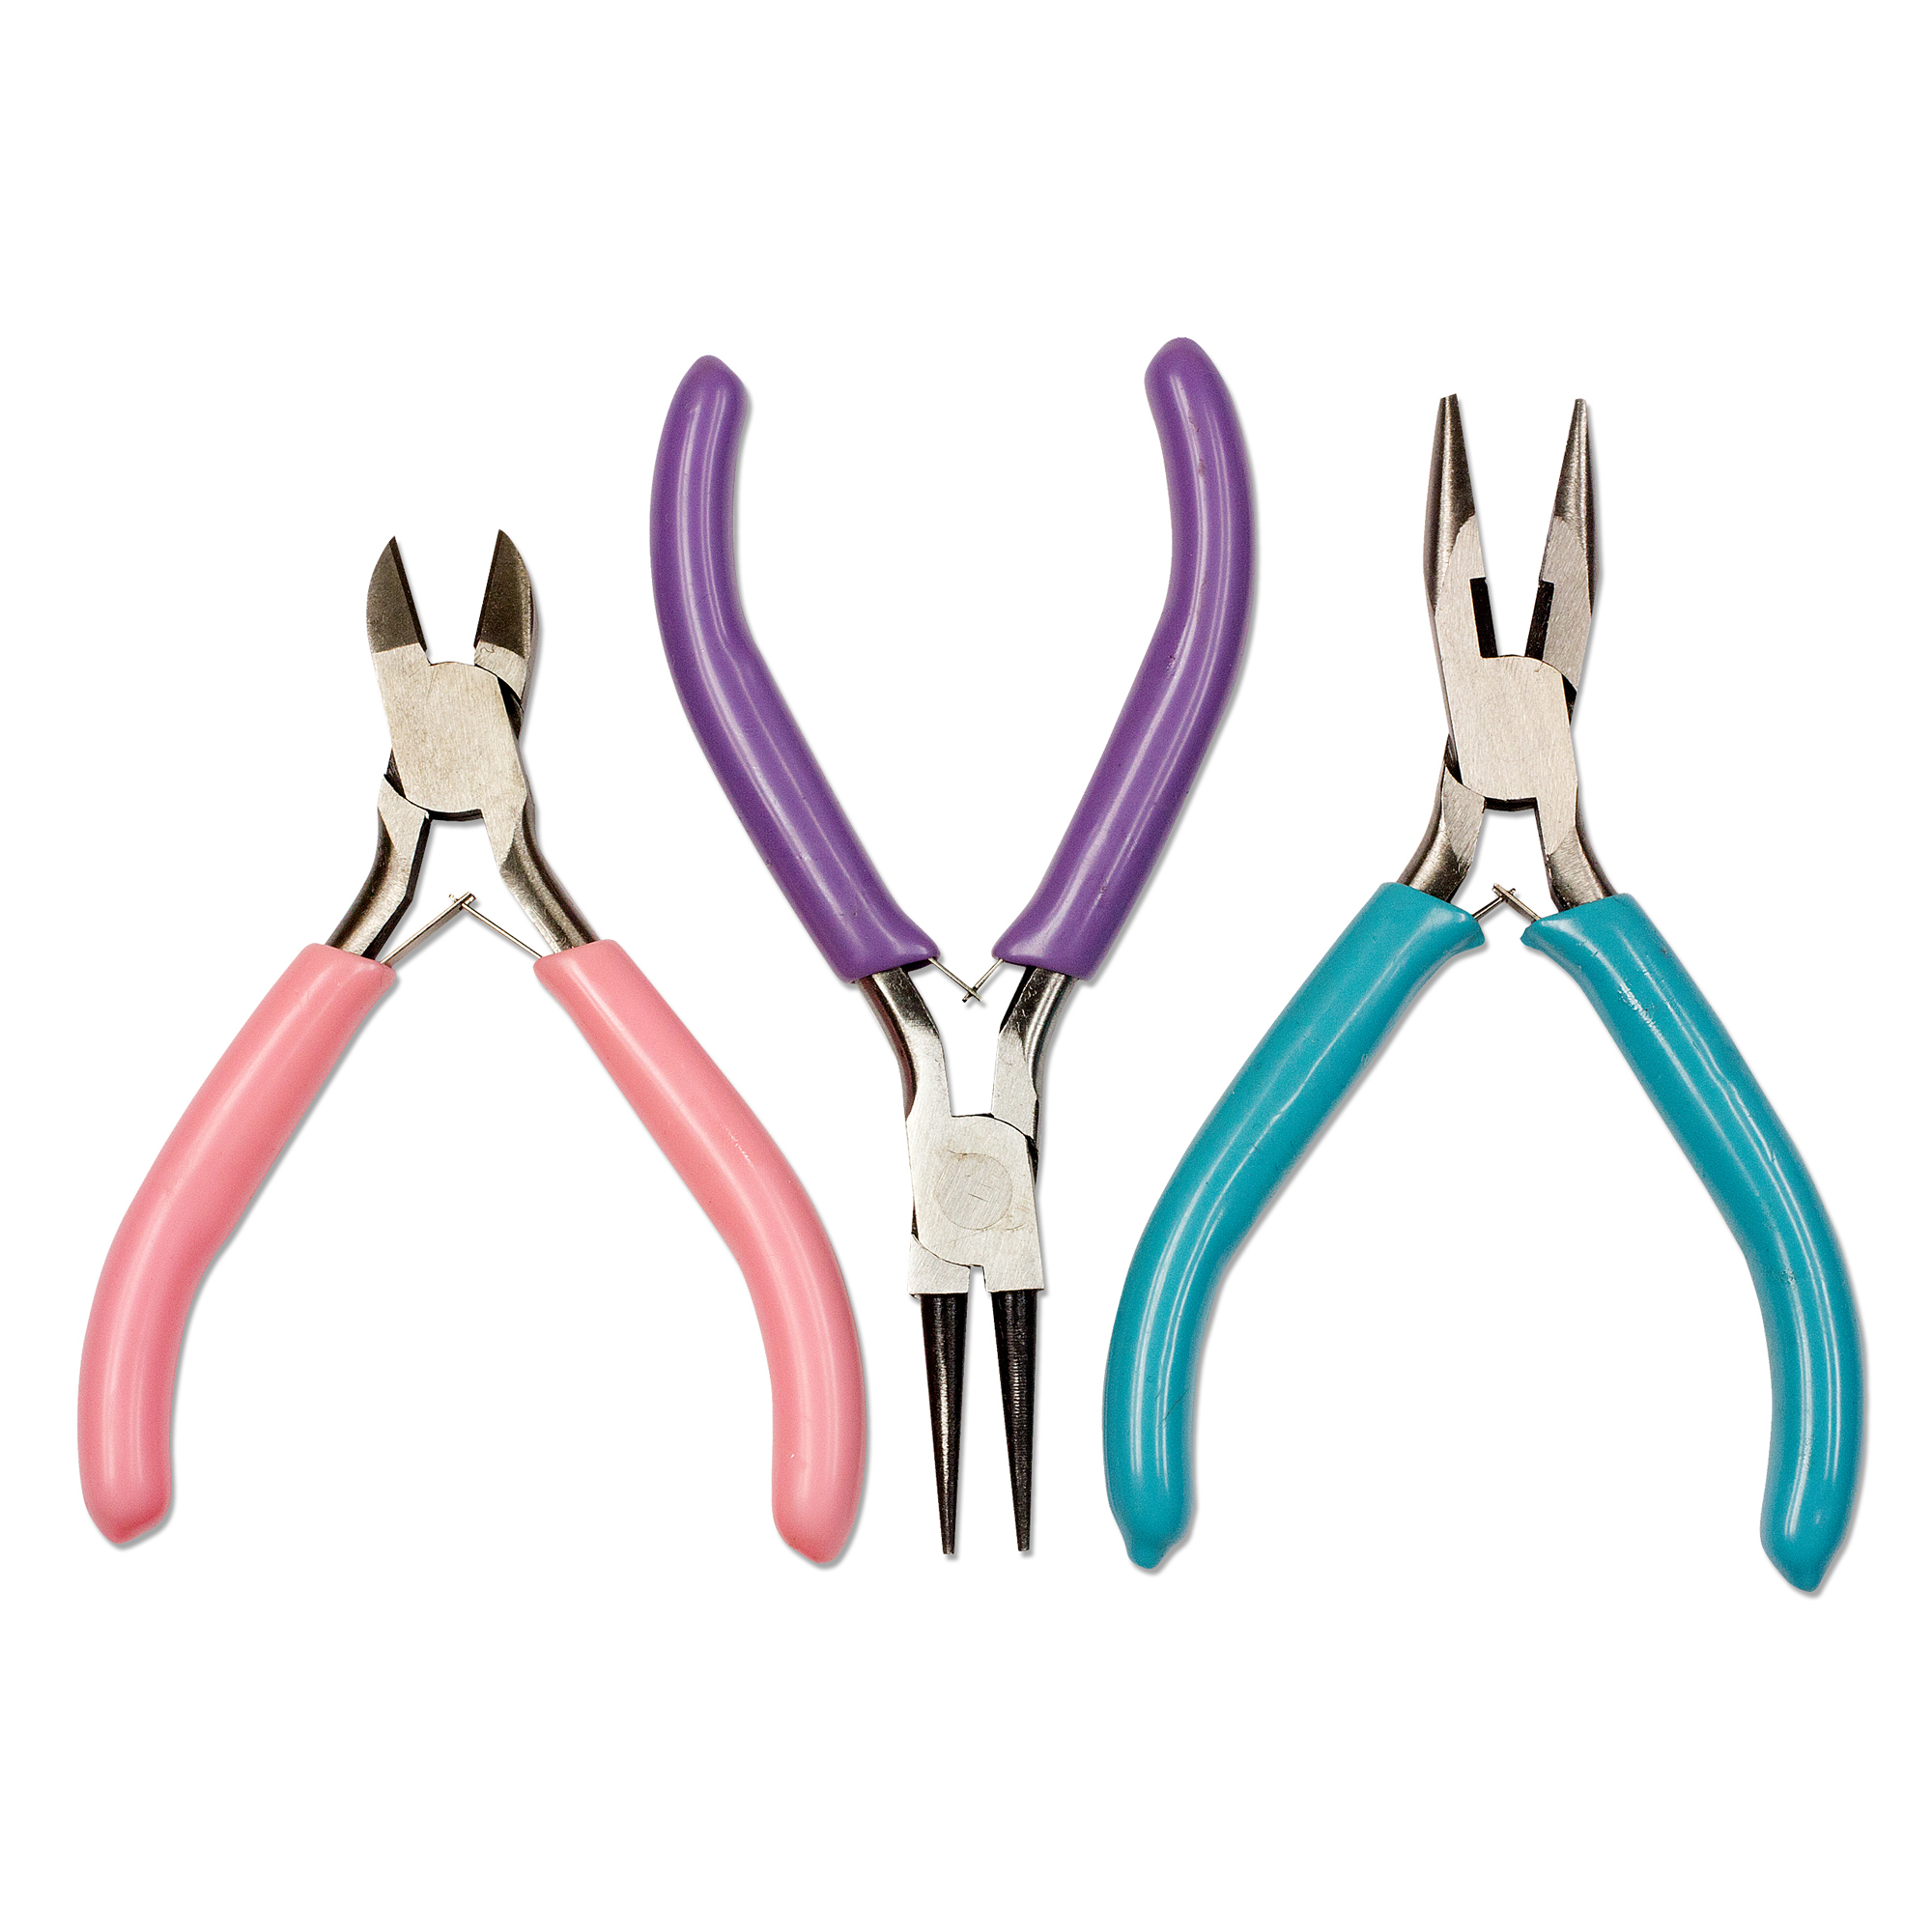 Cousin DIY 3 Piece Craft & Jewelry Making Tool Kit, Pliers and Side Cutters - image 1 of 5